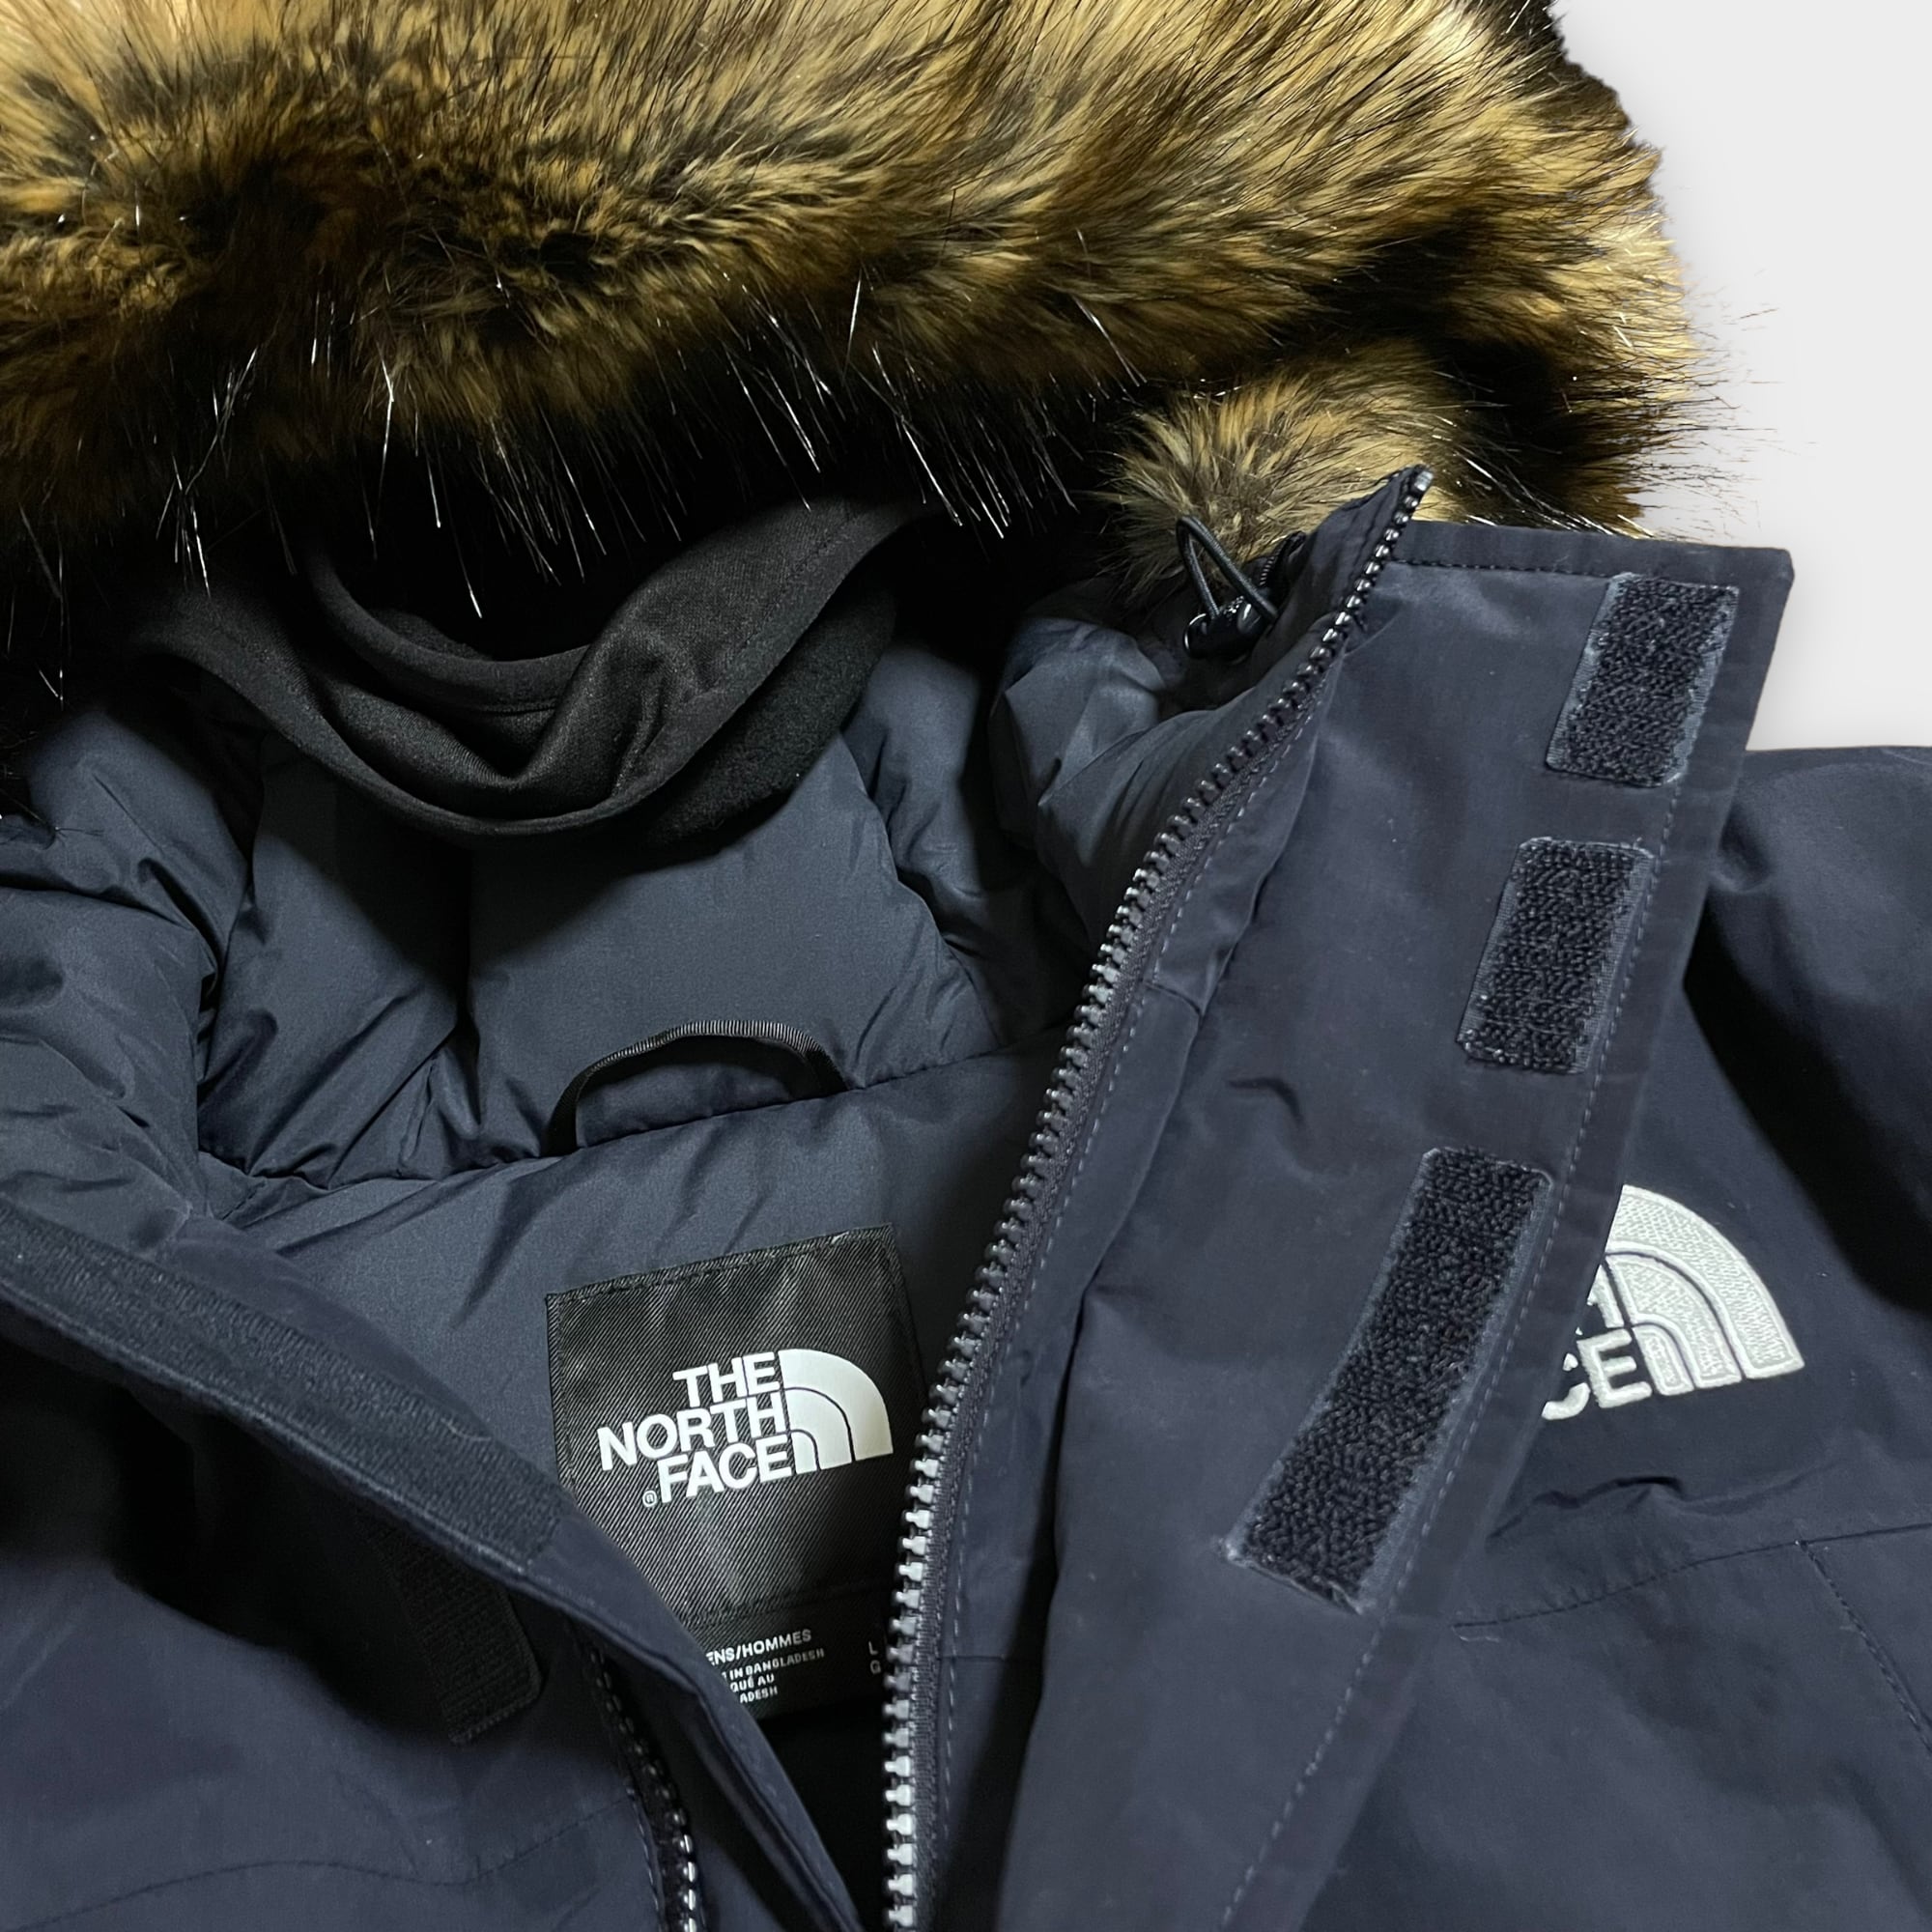 THE NORTH FACE】美品 マクマード ダウンパーカー MCMURDO PARKA